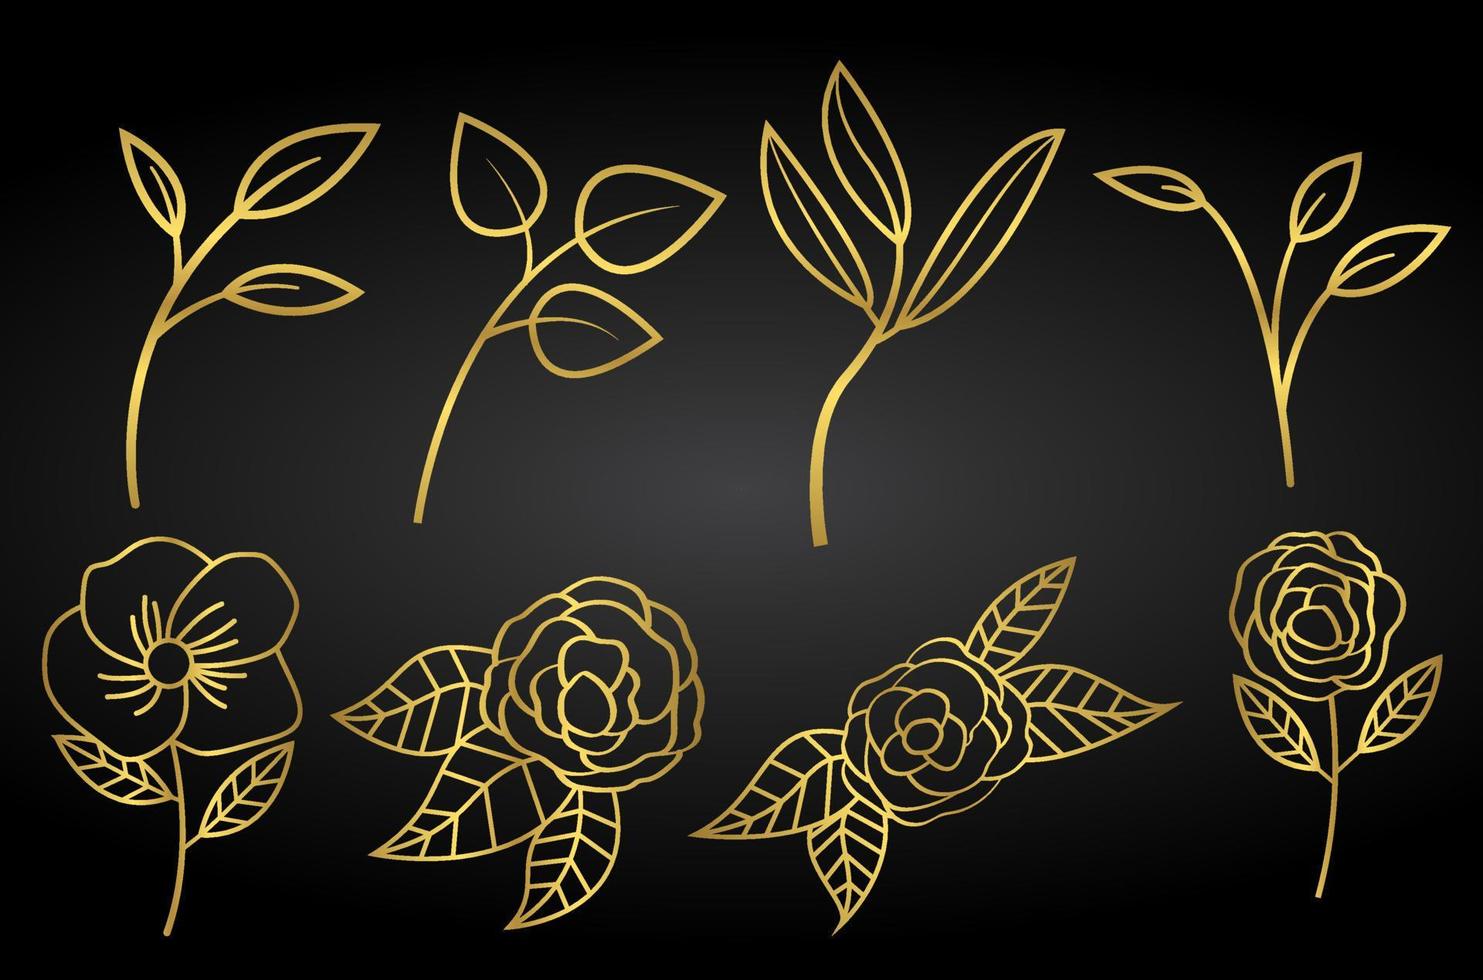 Gold Flowers and Leaves Illustration vector